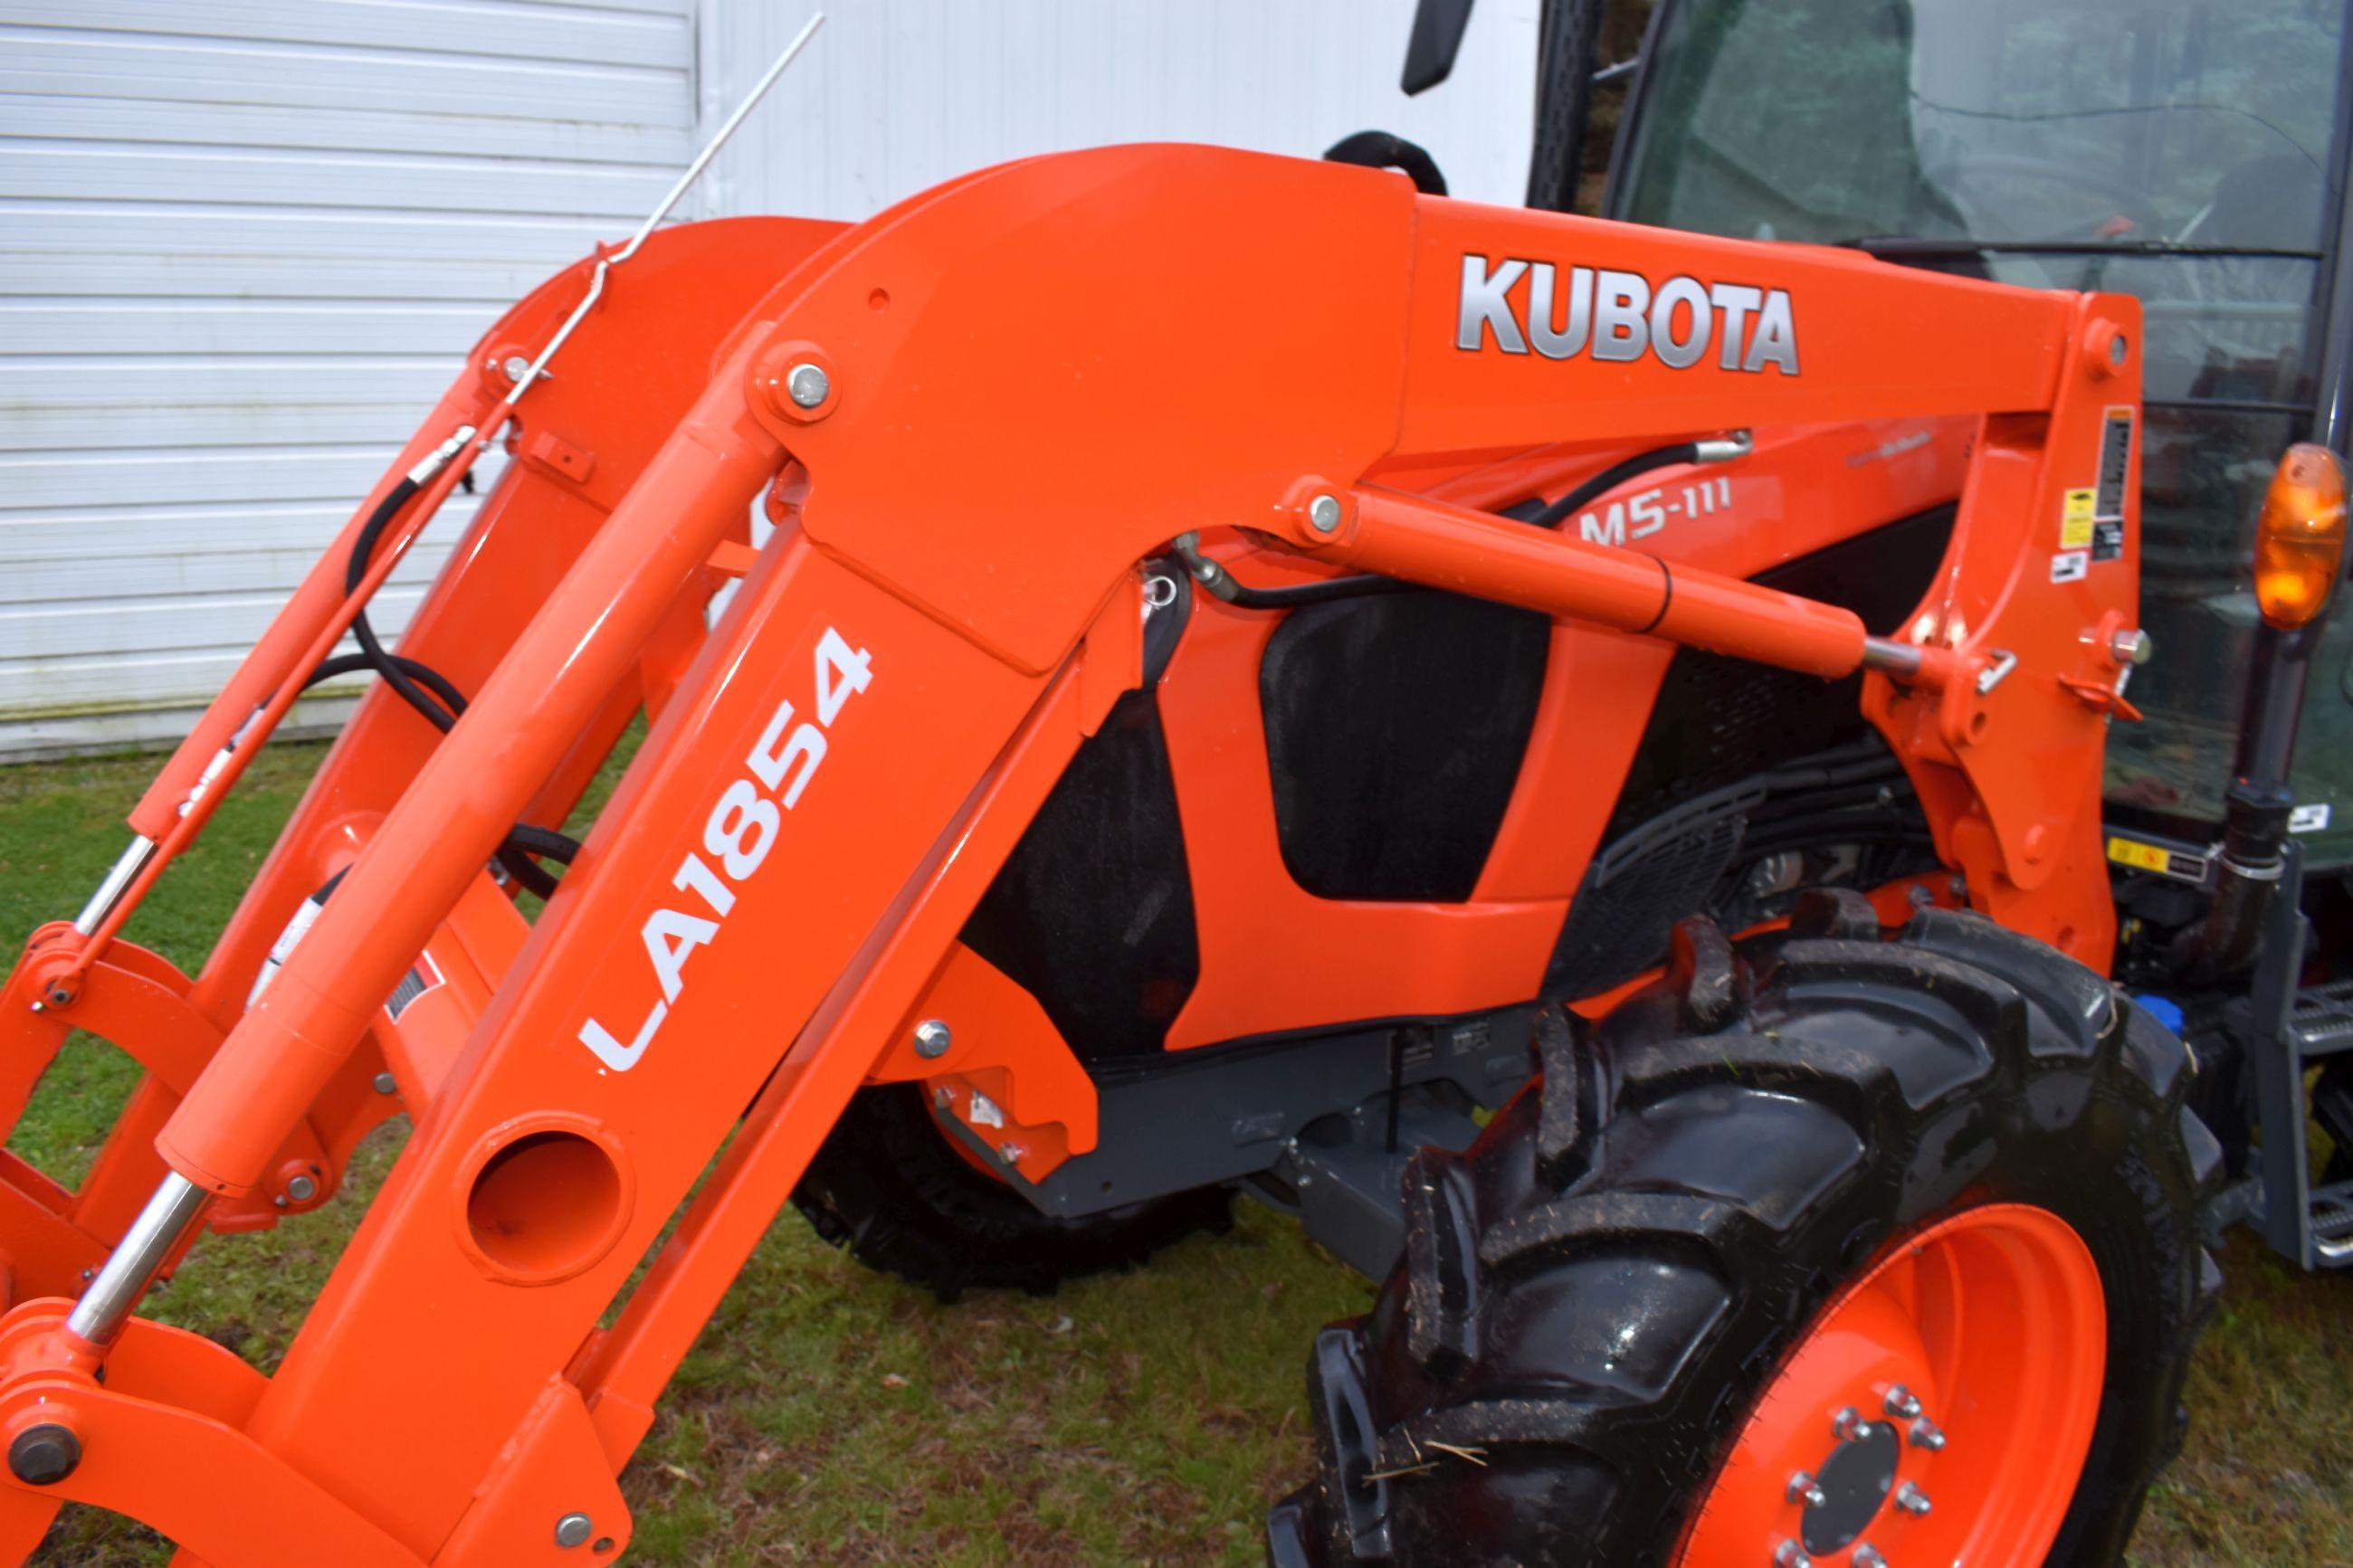 2018 Kubota M5-111 MFWD, Full Cab With LA1854 Hyd Loader With Universal Skid Plate, 83” Bucket, 320/